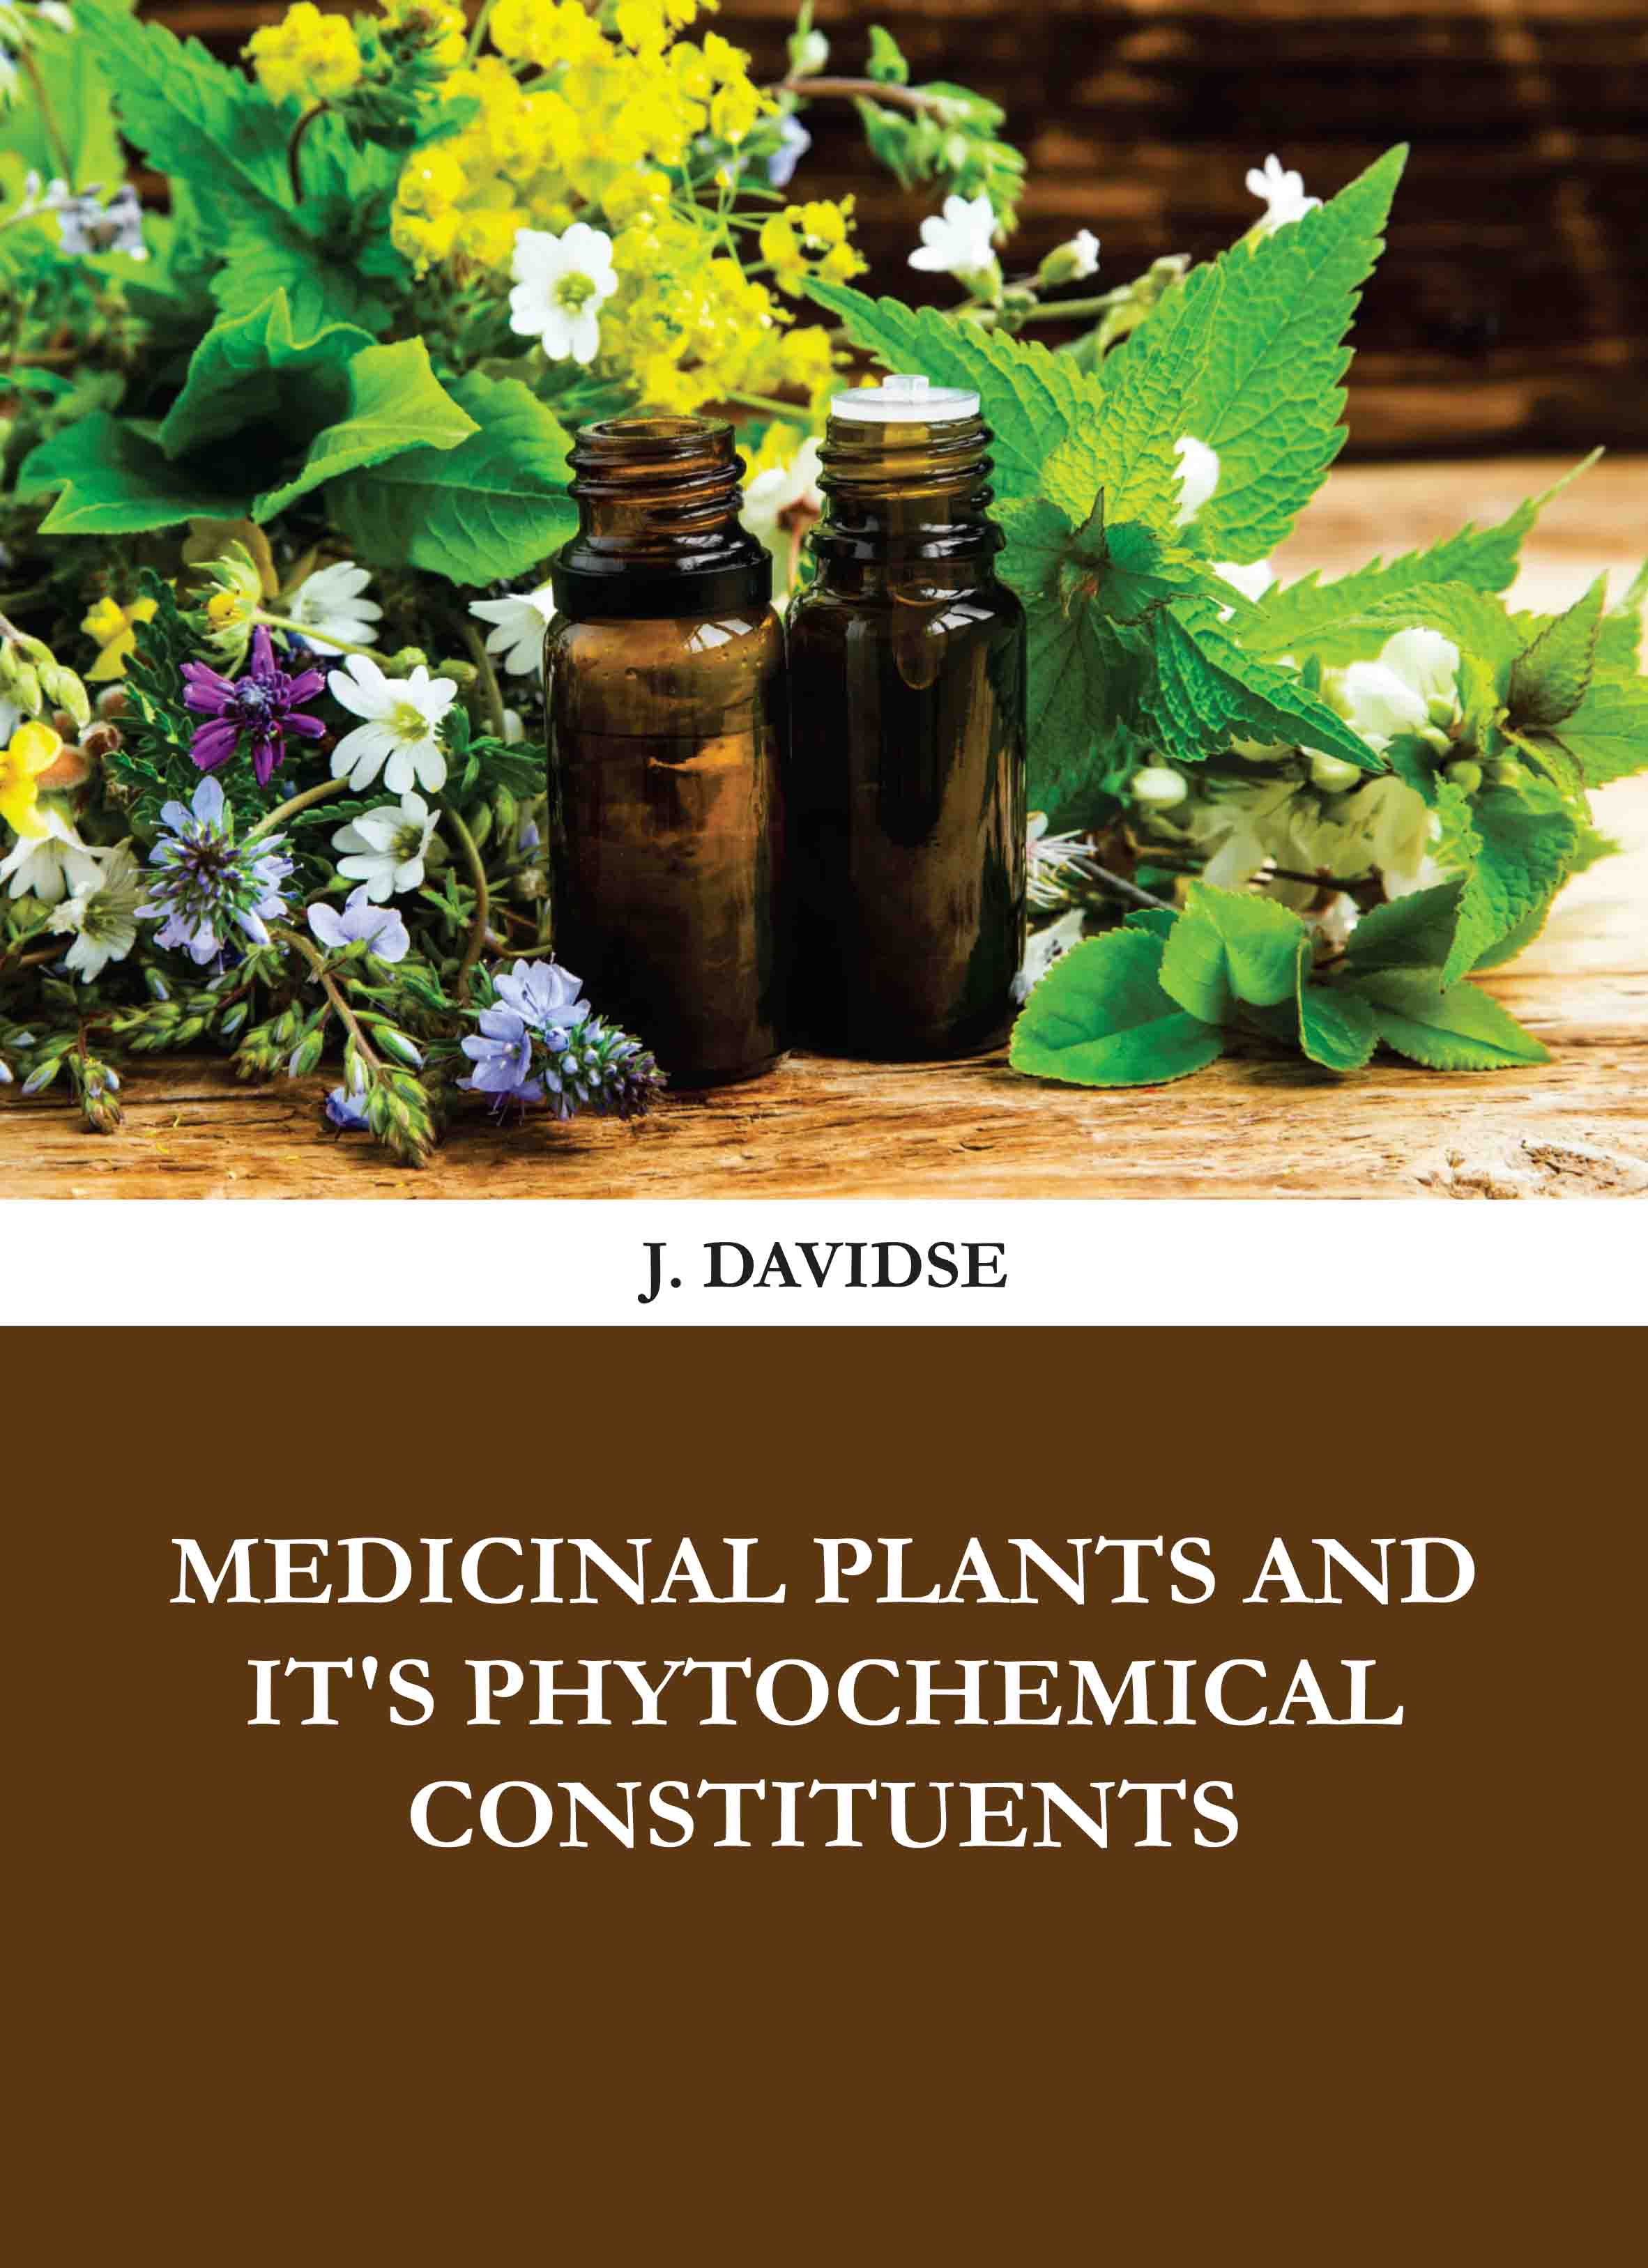 Medicinal Plants and It's Phytochemical Constituents